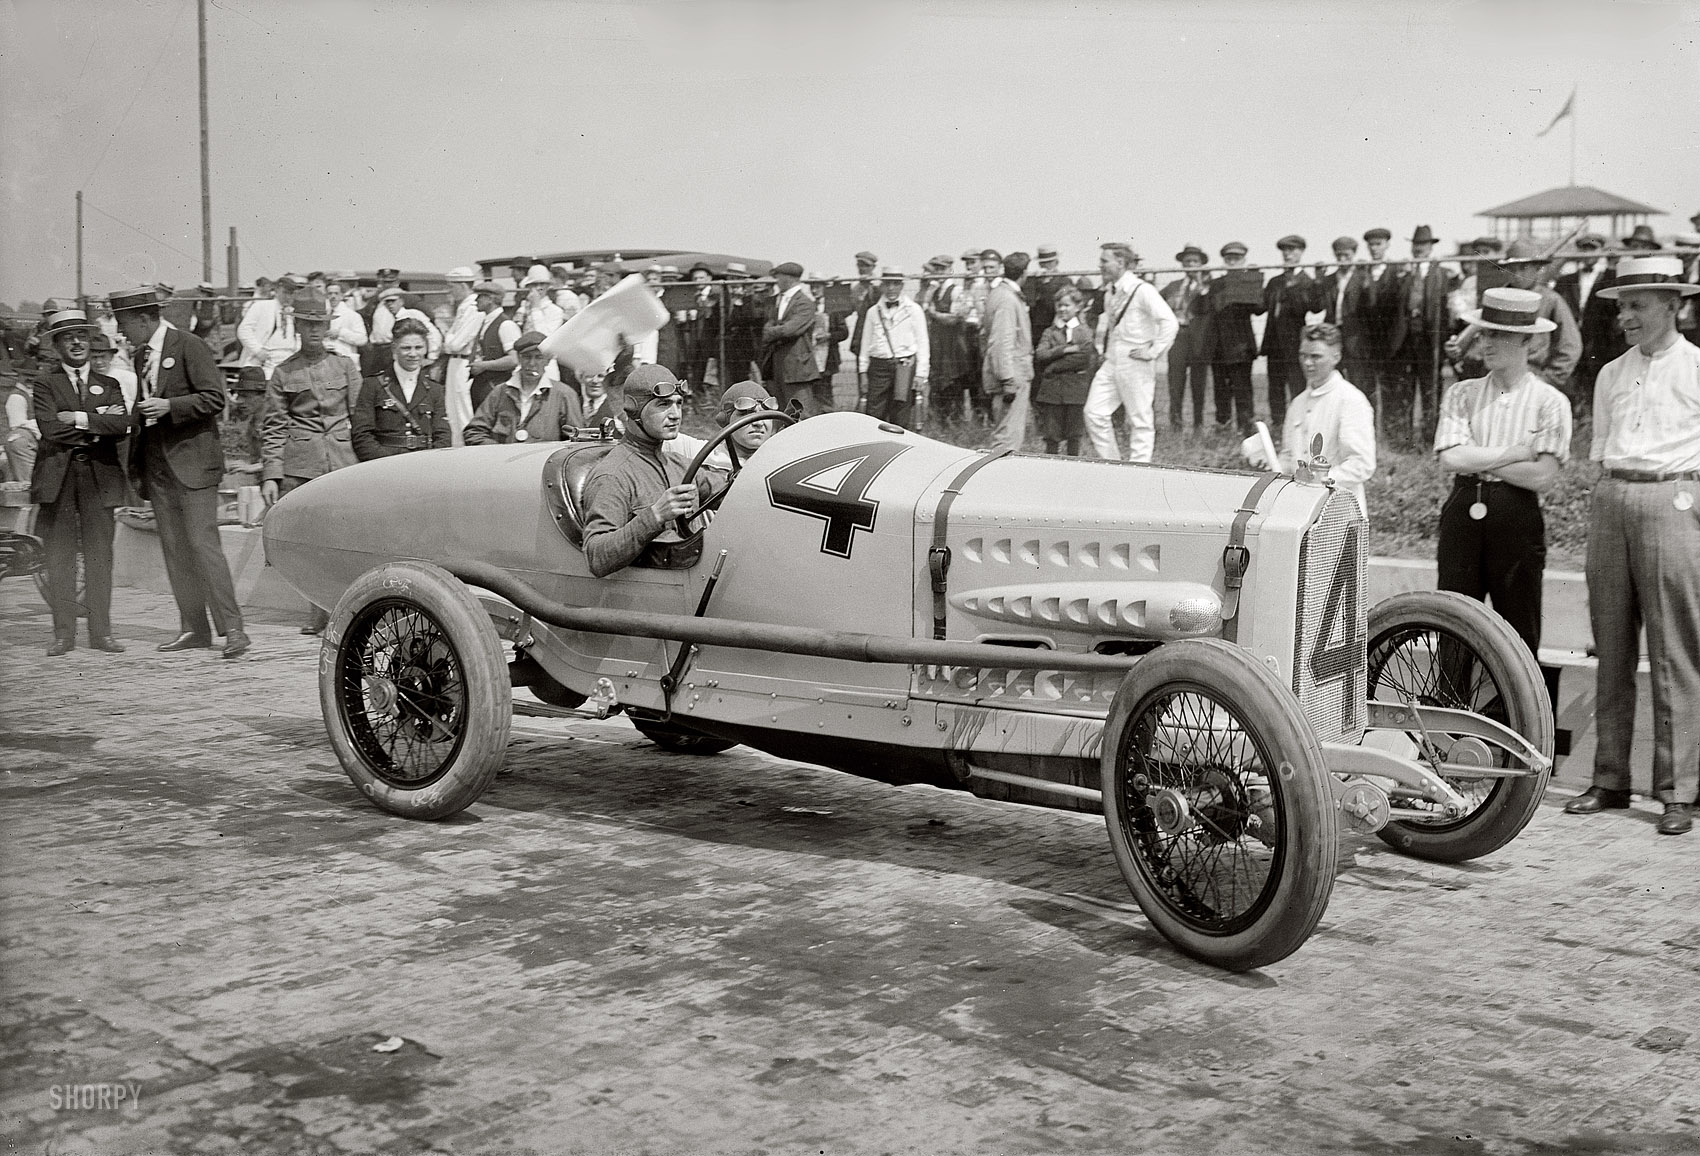 June 1, 1918. The Italian racecar driver Ralph DePalma and mechanic in the Packard that won the Harkness Handicap at Sheepshead Bay Speedway in Brooklyn. 5x7 glass negative, George Grantham Bain Collection. View full size.